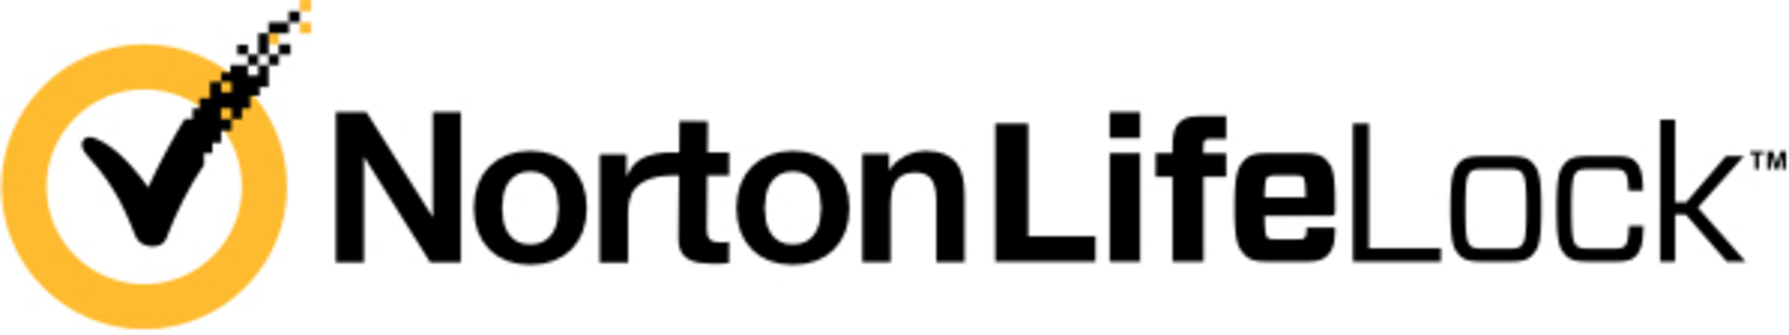 NortonLifeLock Advocates for Proactive Online Safety and Privacy Measures  During Cybersecurity Awareness Month 2021